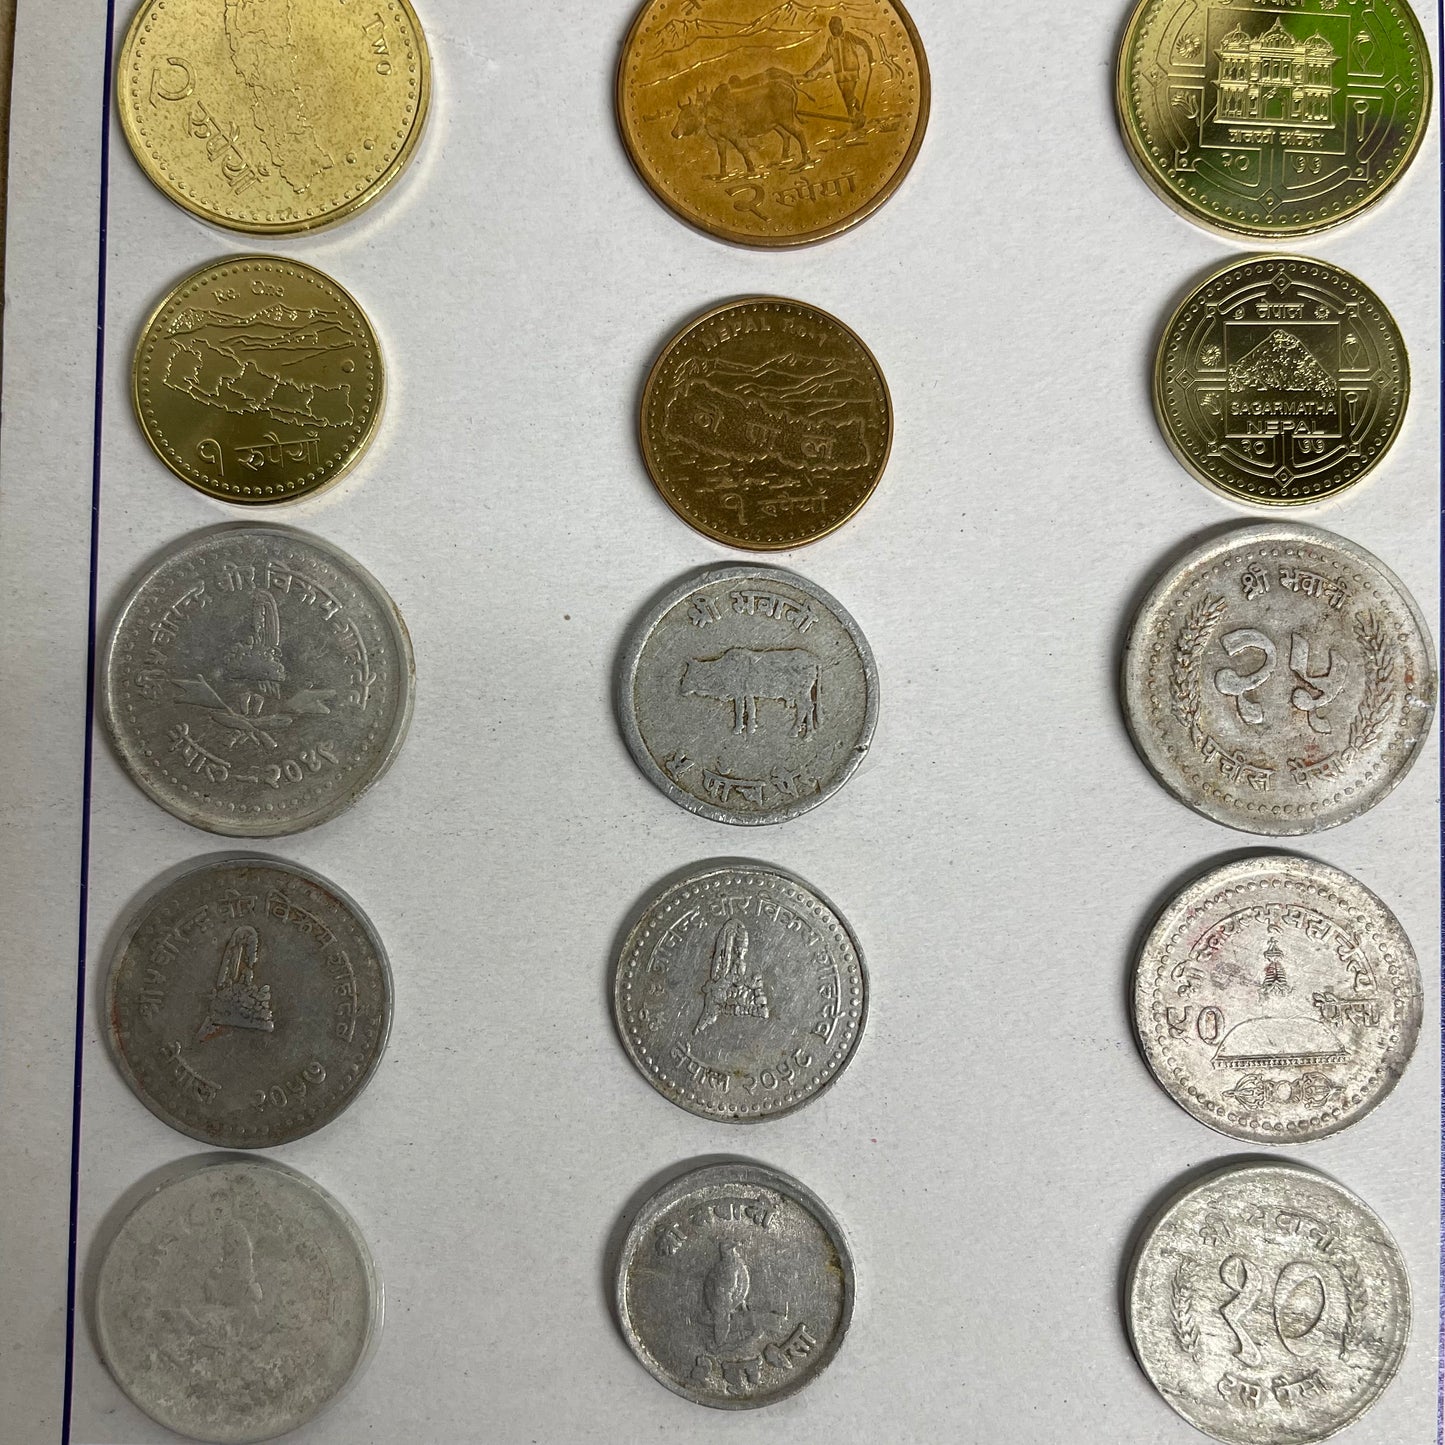 Nepali coins collection | New Coins from Nepal